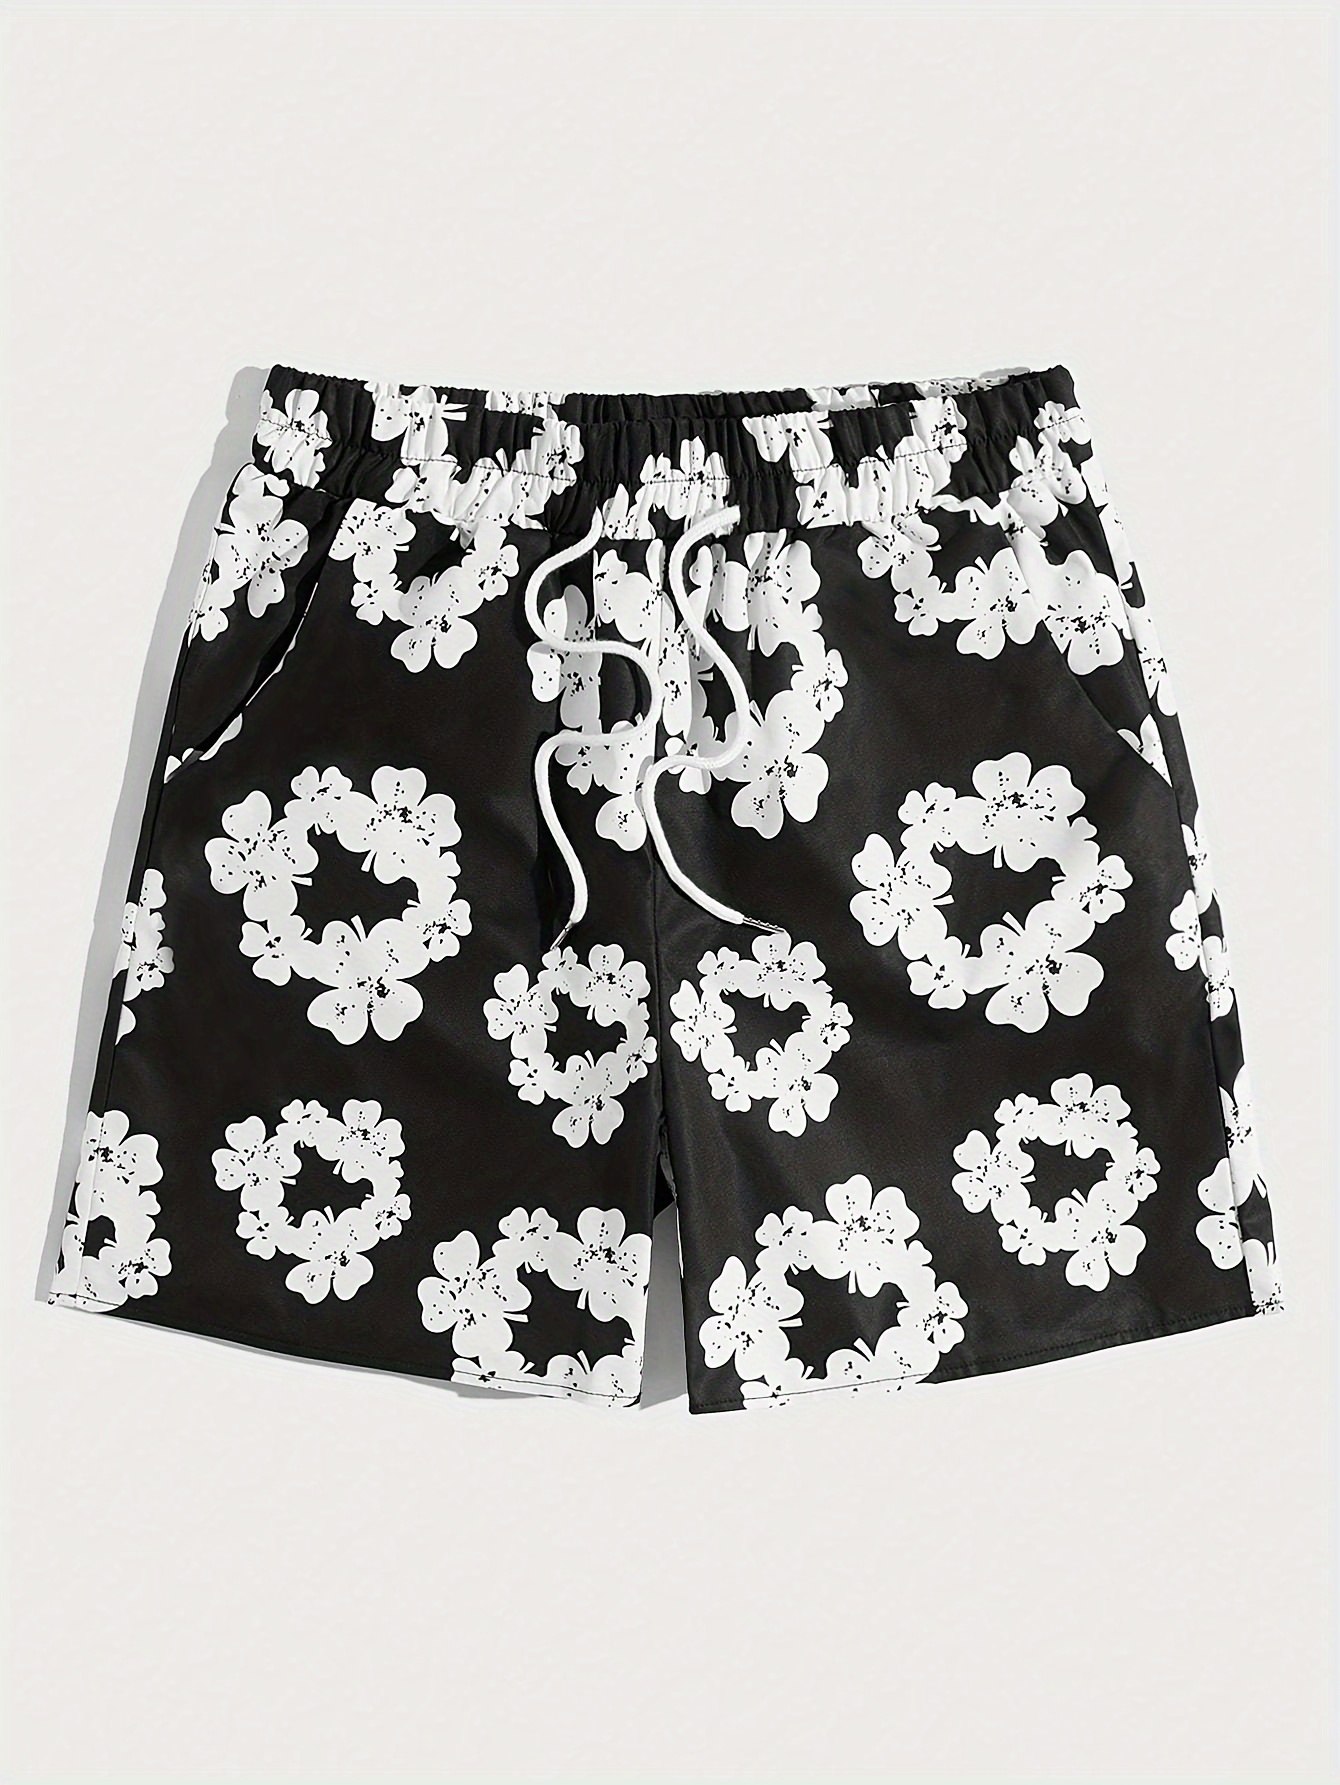 Angelsoft Graphic Print Shorts Sexy Slim Summer Booty Shorts